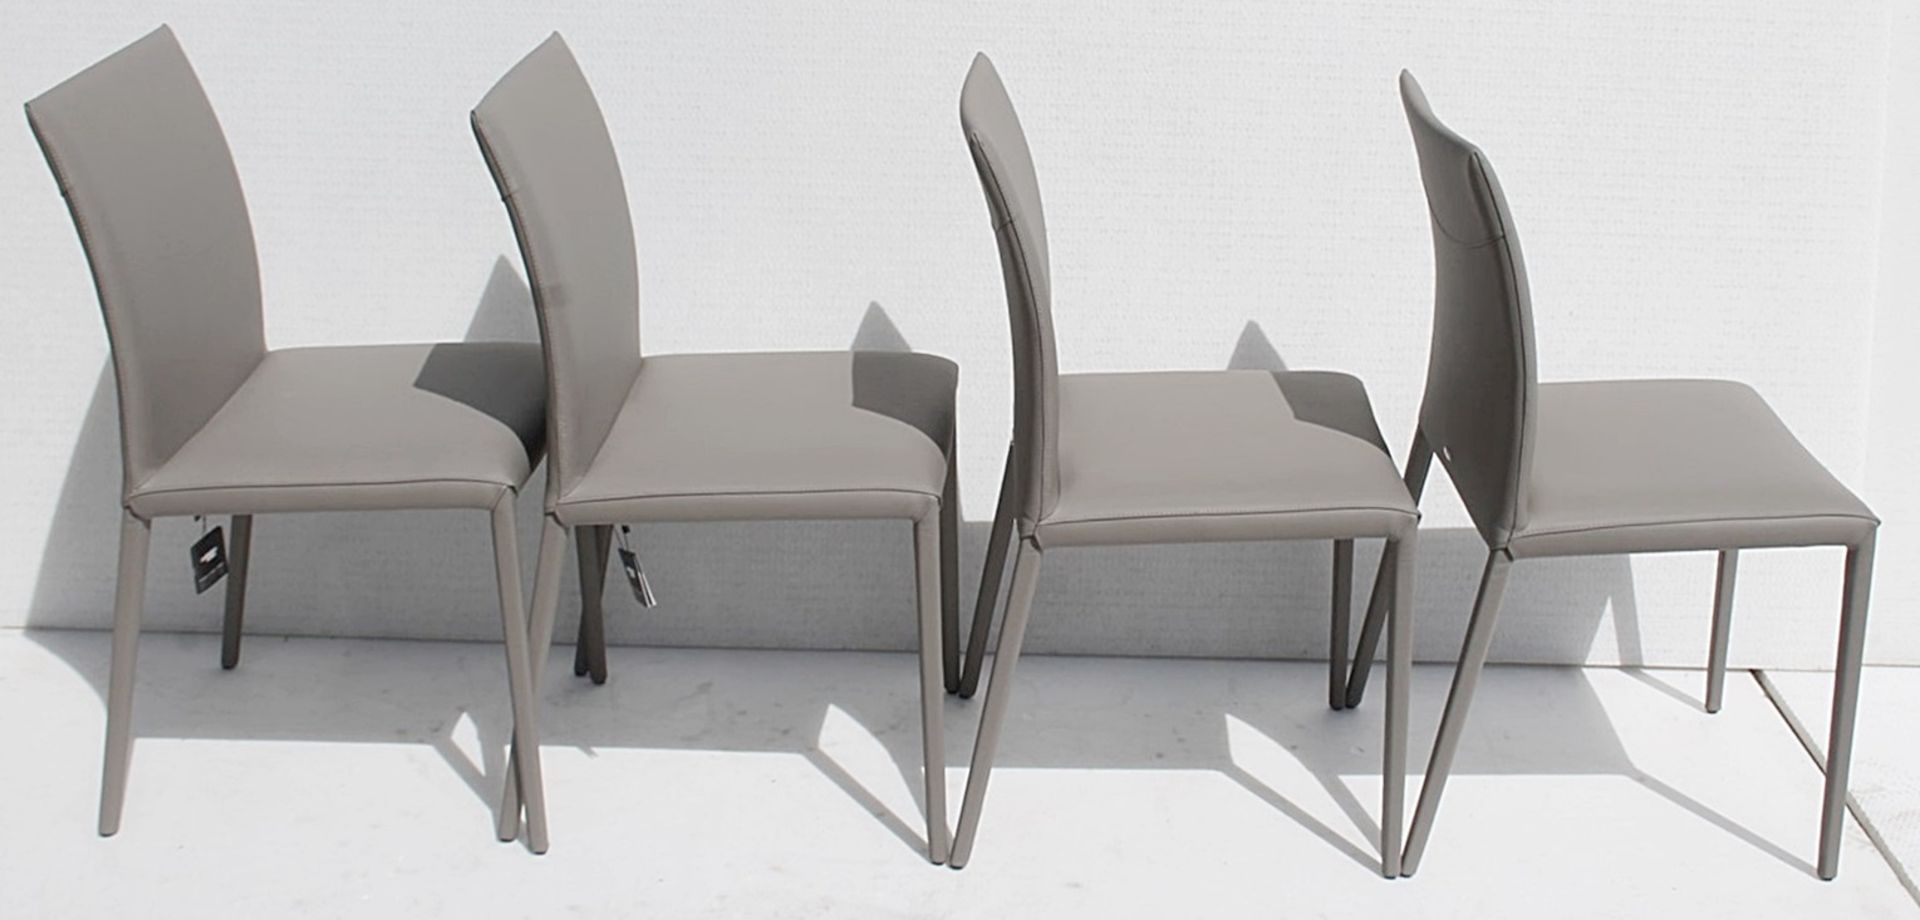 4 x CATELLAN 'Norma' Designer Italian Dining Chairs In Soft Grey Leather - Original RRP £3,840 - Image 4 of 7